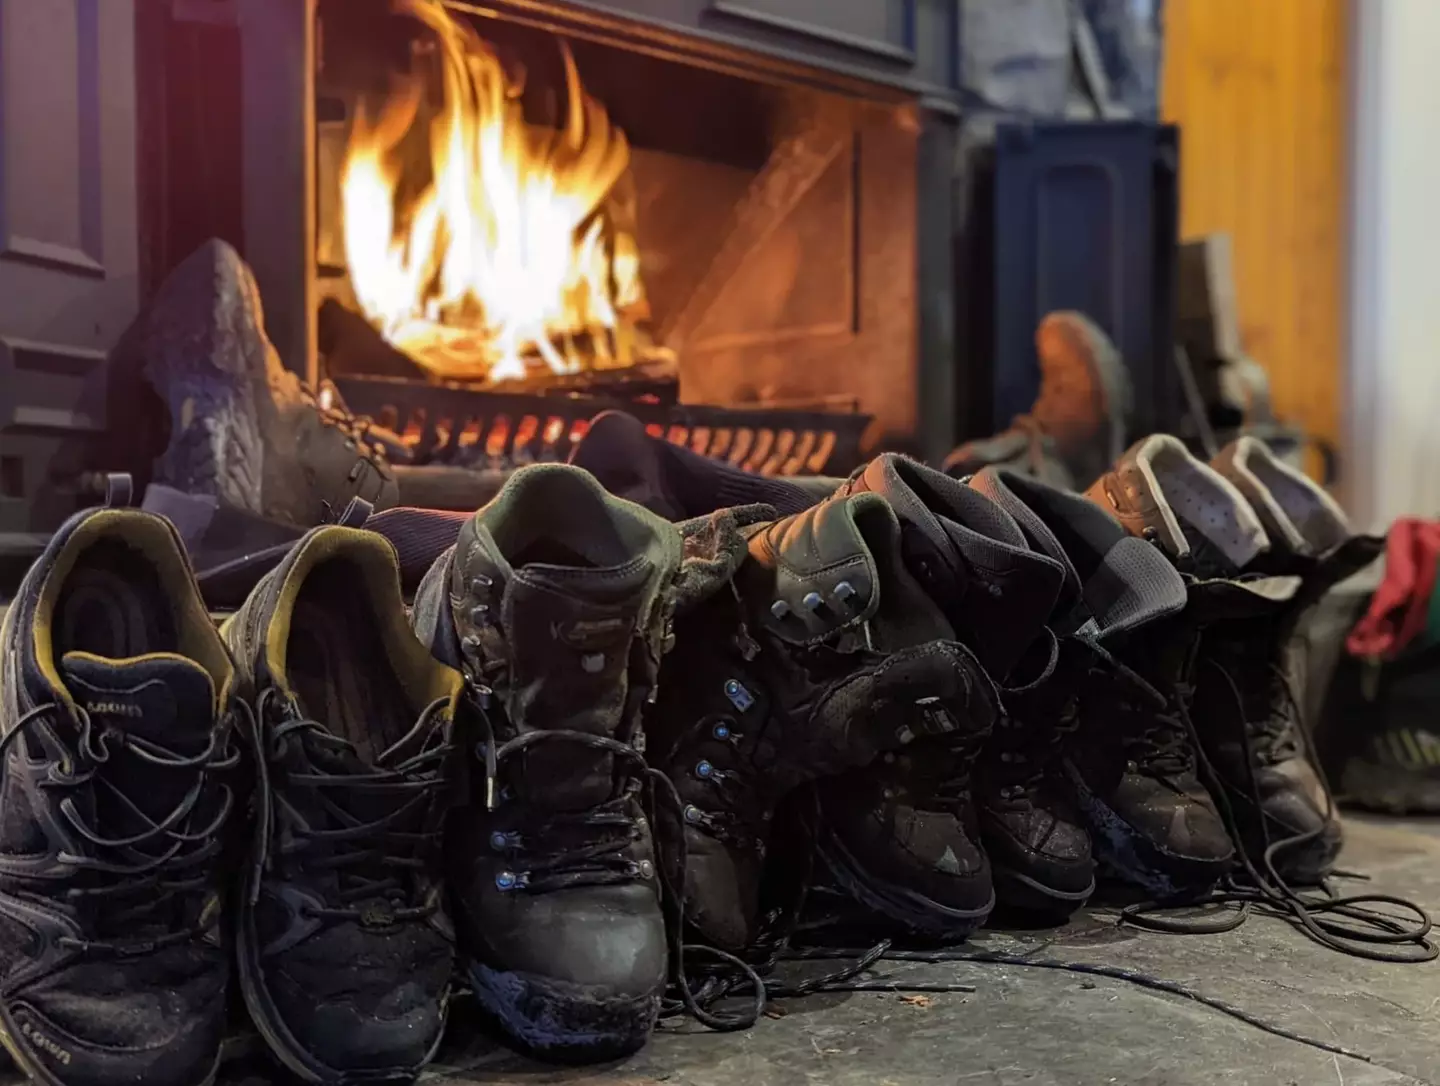 The pub has a fire for hikers to warm their boots.